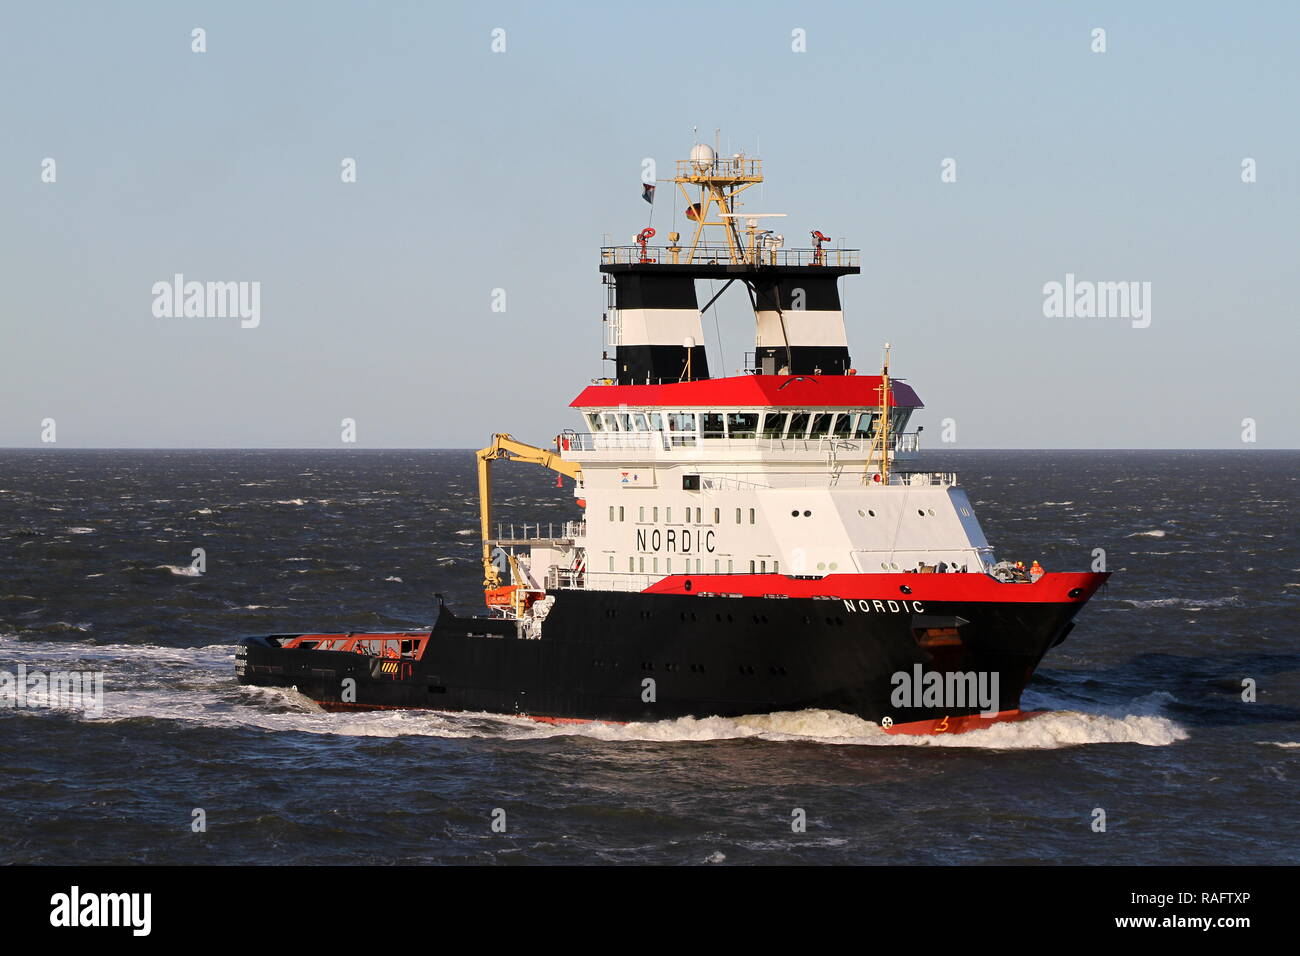 The emergency tug Nordic returns on 2 January 2019 from an emergency operation on the North Sea to Cuxhaven. Stock Photo